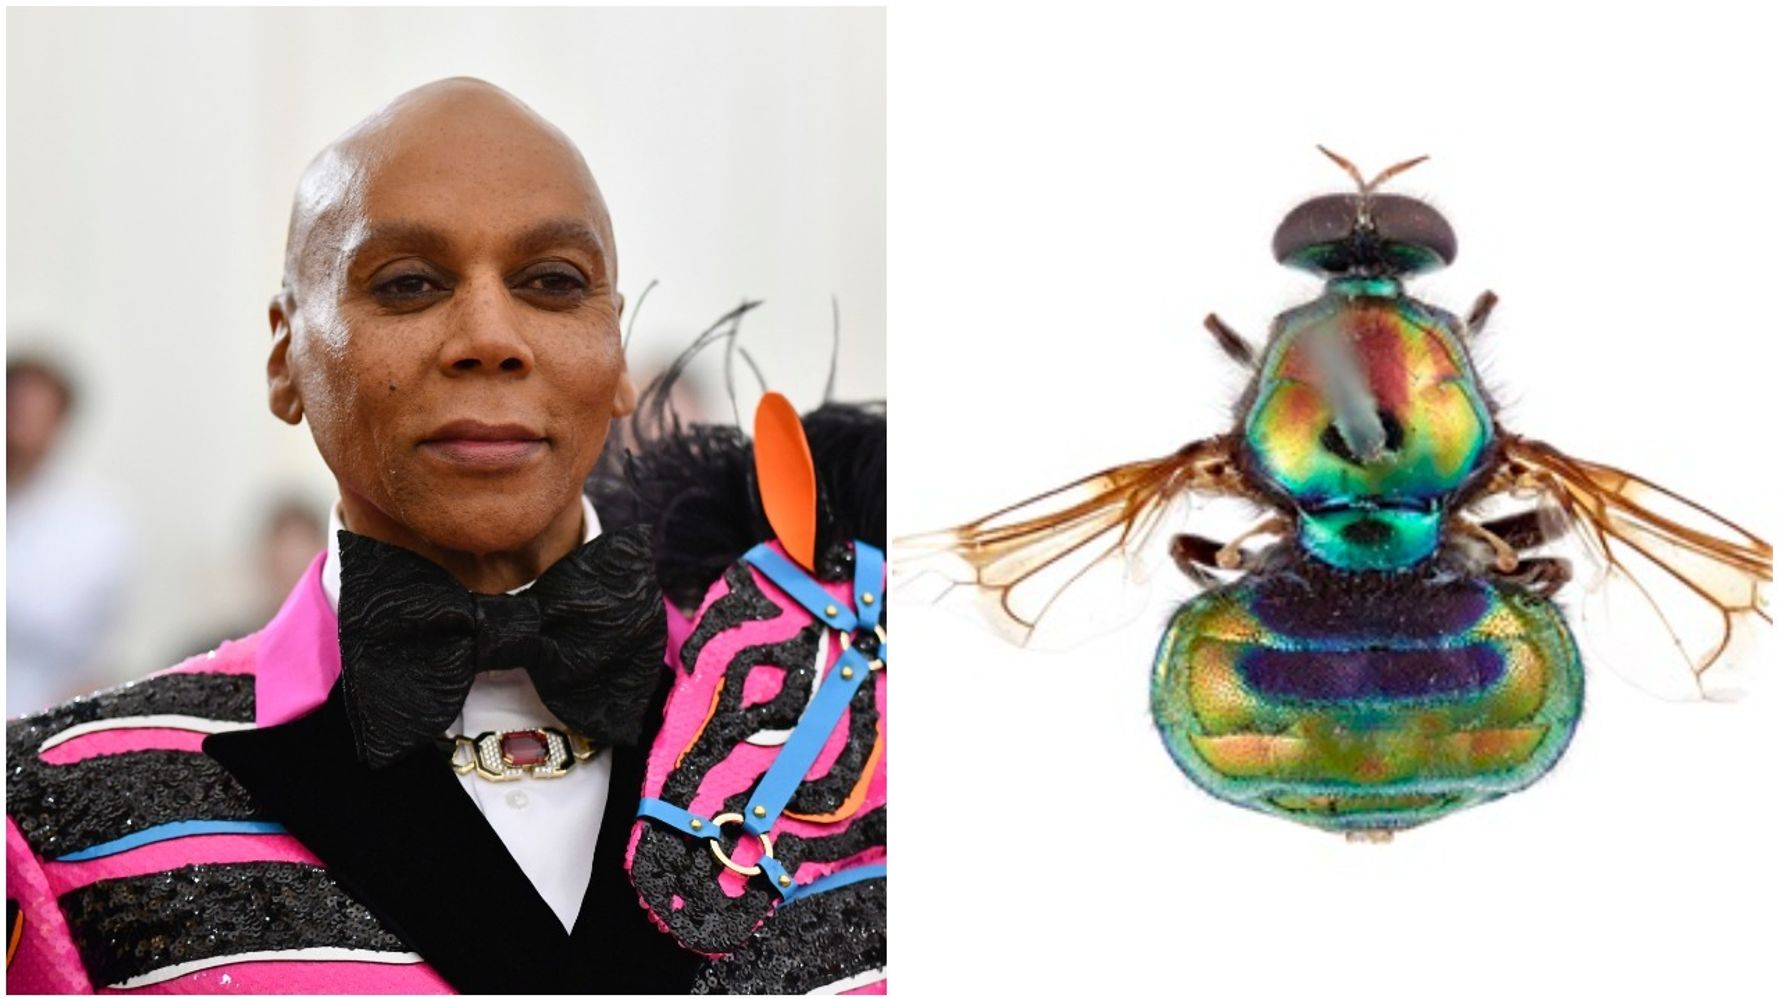 New Rainbow Fly Species With ‘Legs For Days’ Named After RuPaul